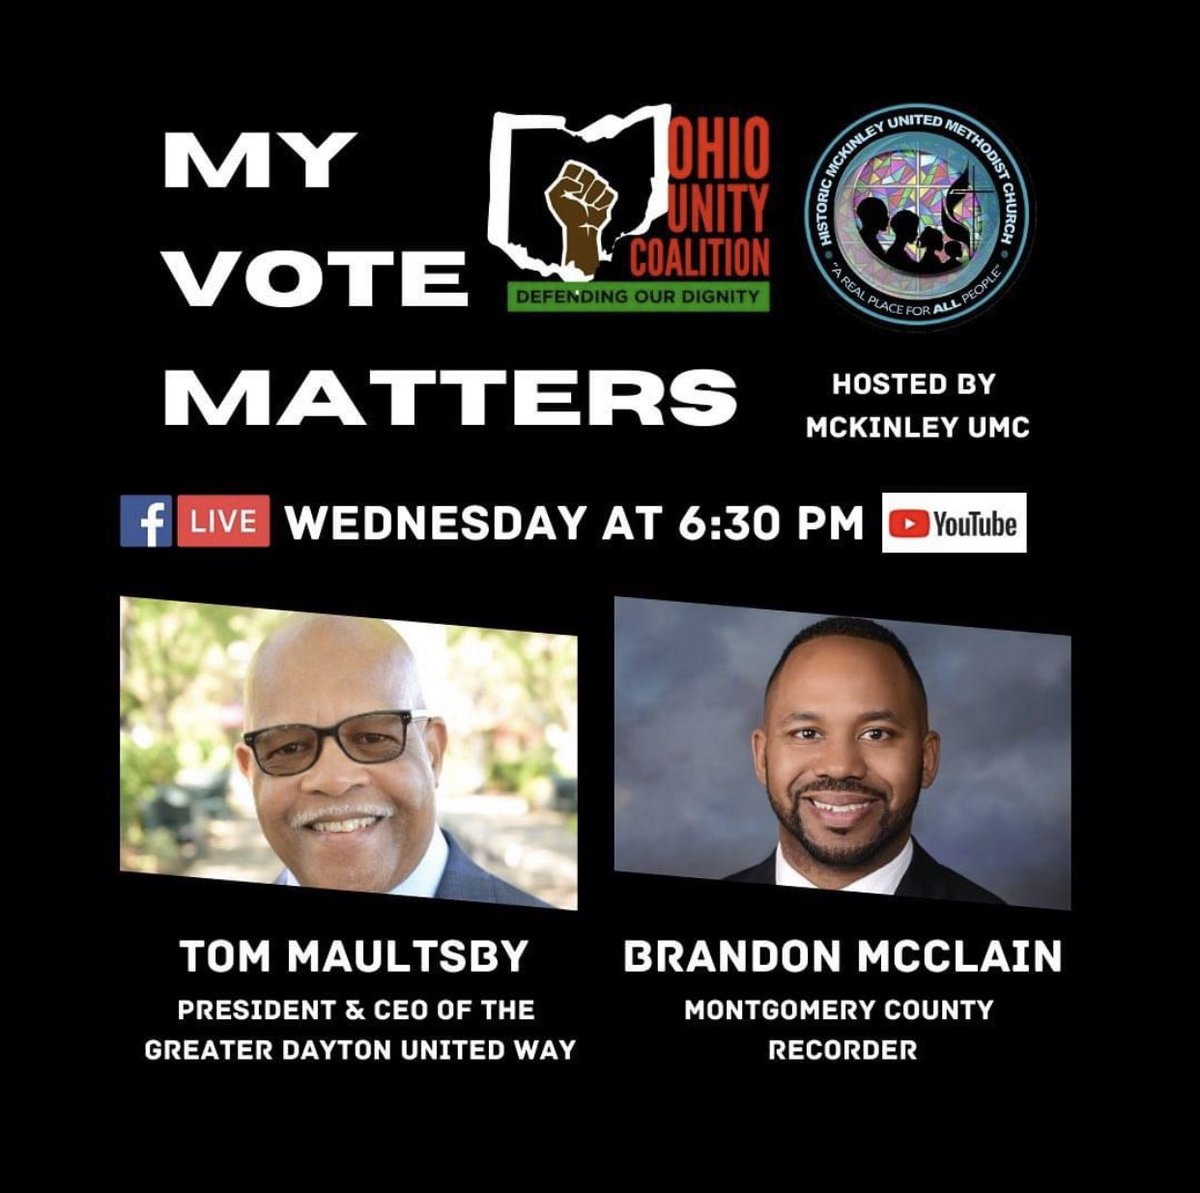 Election Day is in 50 days. We must GOTV. When we don’t vote, we are forgetting the past... ignoring the present and giving away the future. Tune in to hear @DaytonUnitedWay President Tom Maultsby and I discuss why your vote matters. @OhioUnity